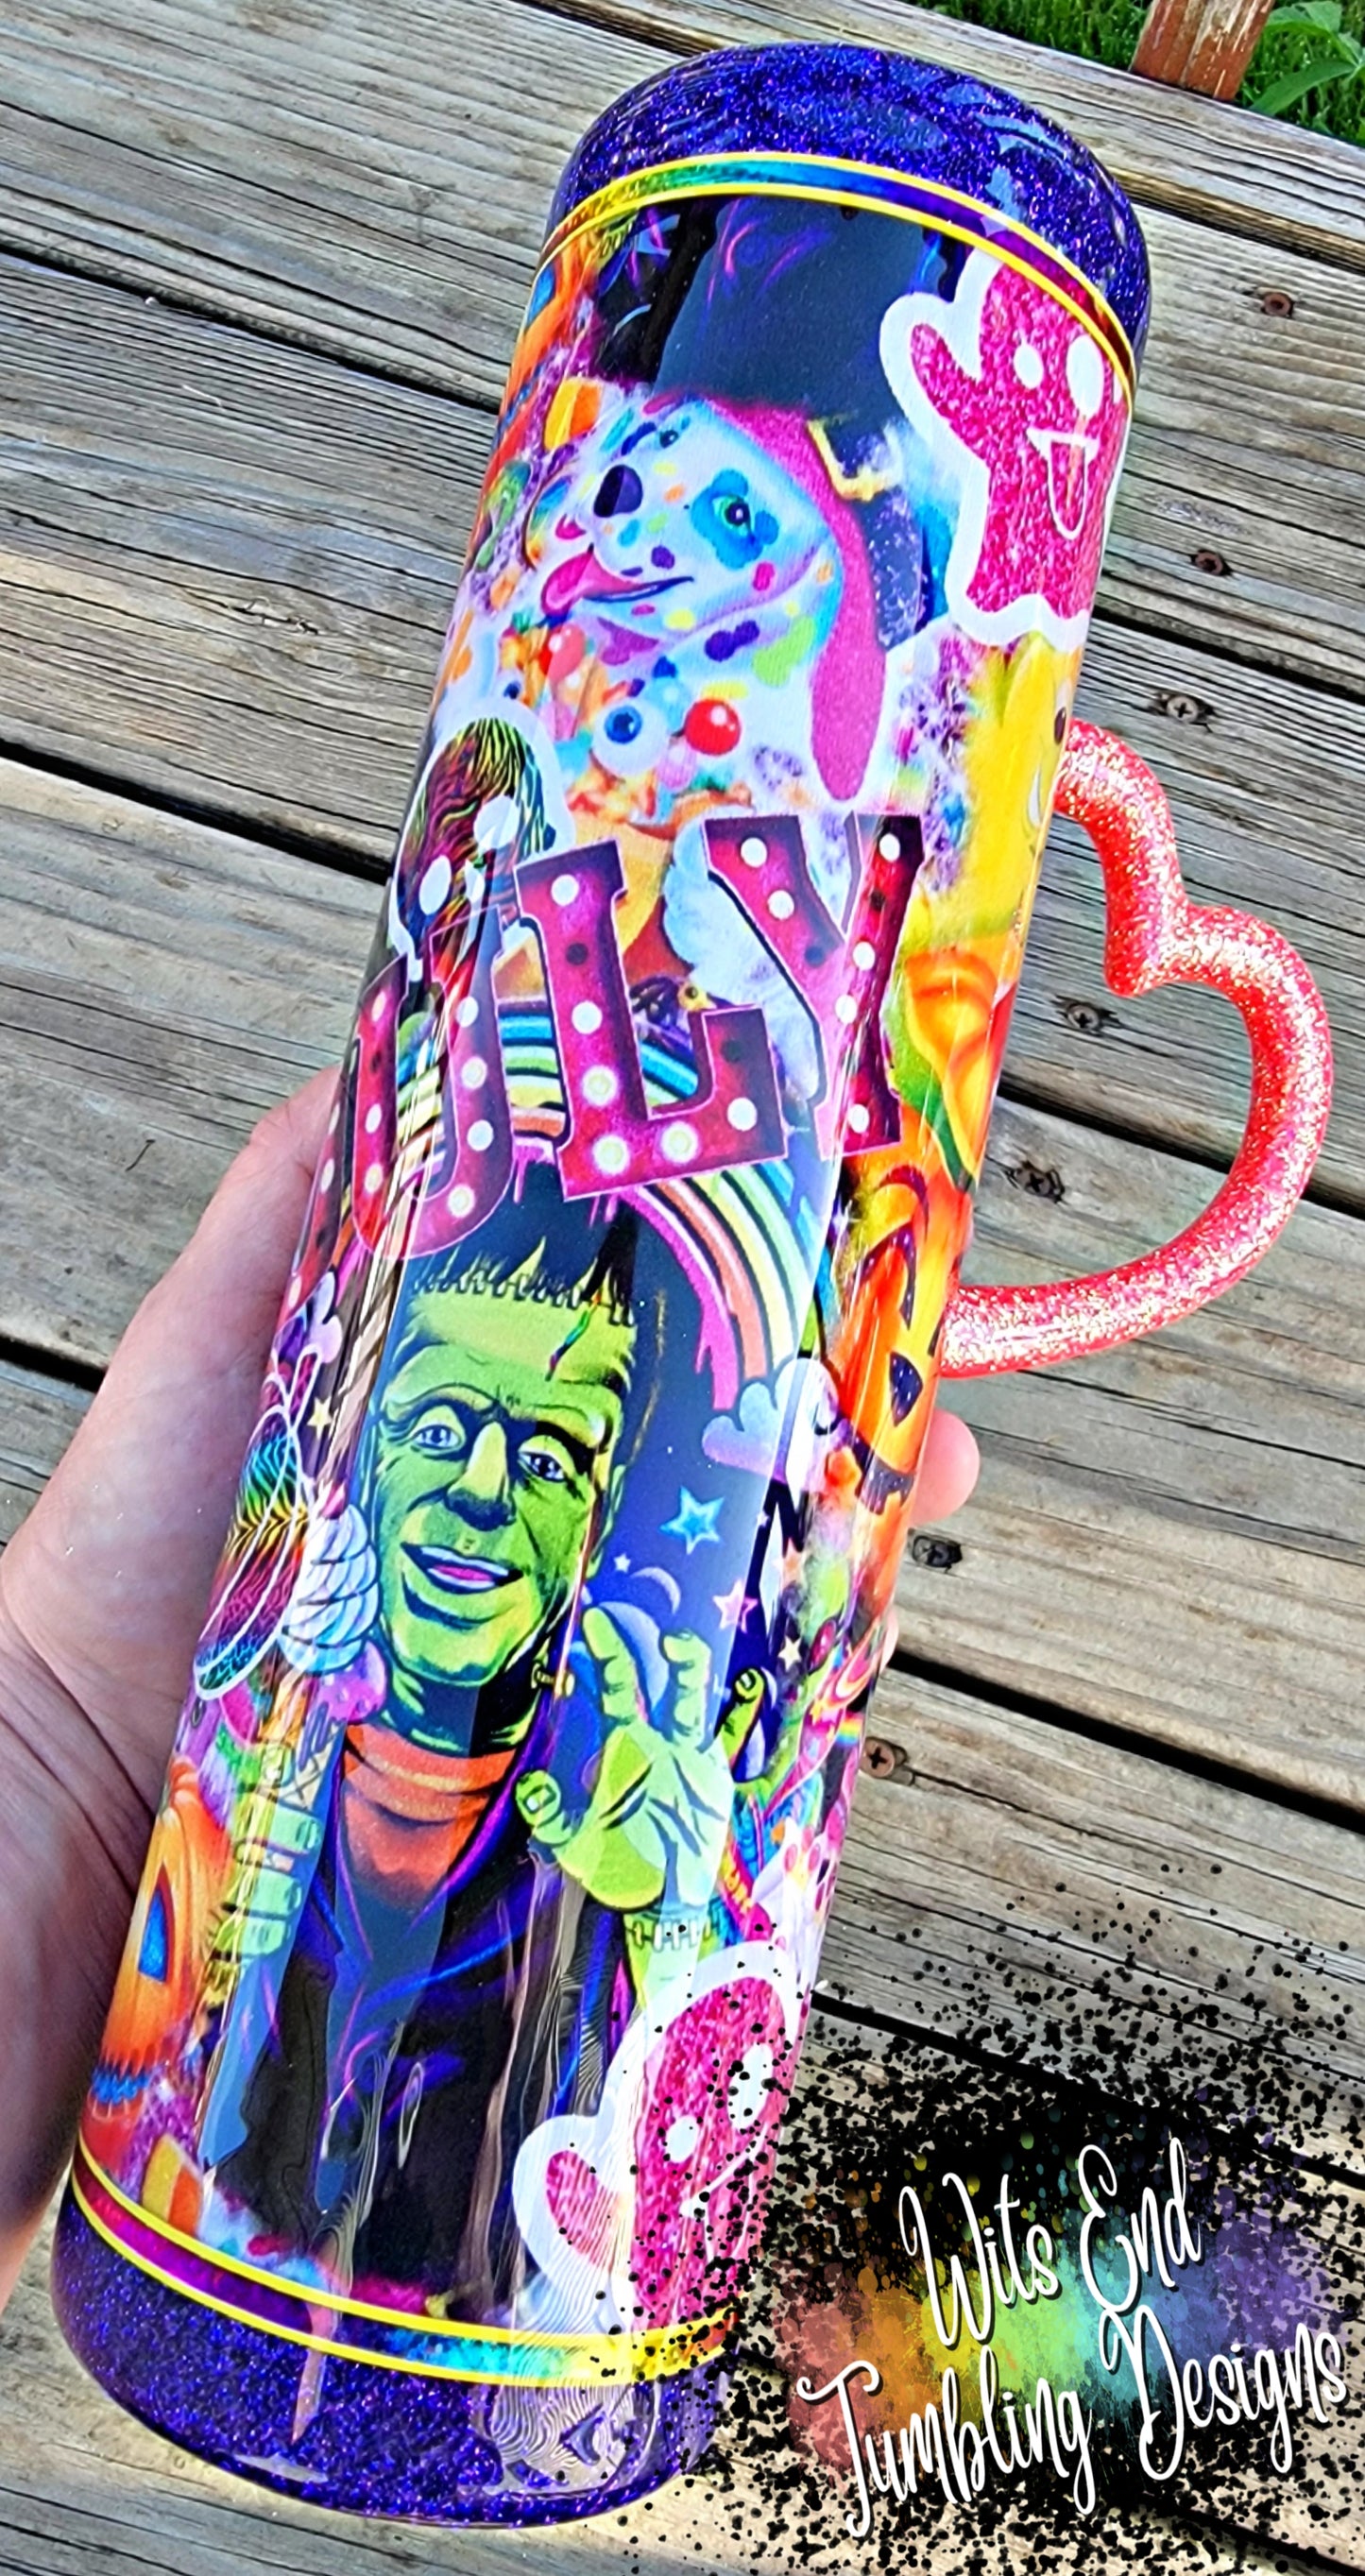 32oz LF 90s halloween inspired fabric tumbler with snowglobe style bottom and 3D handle